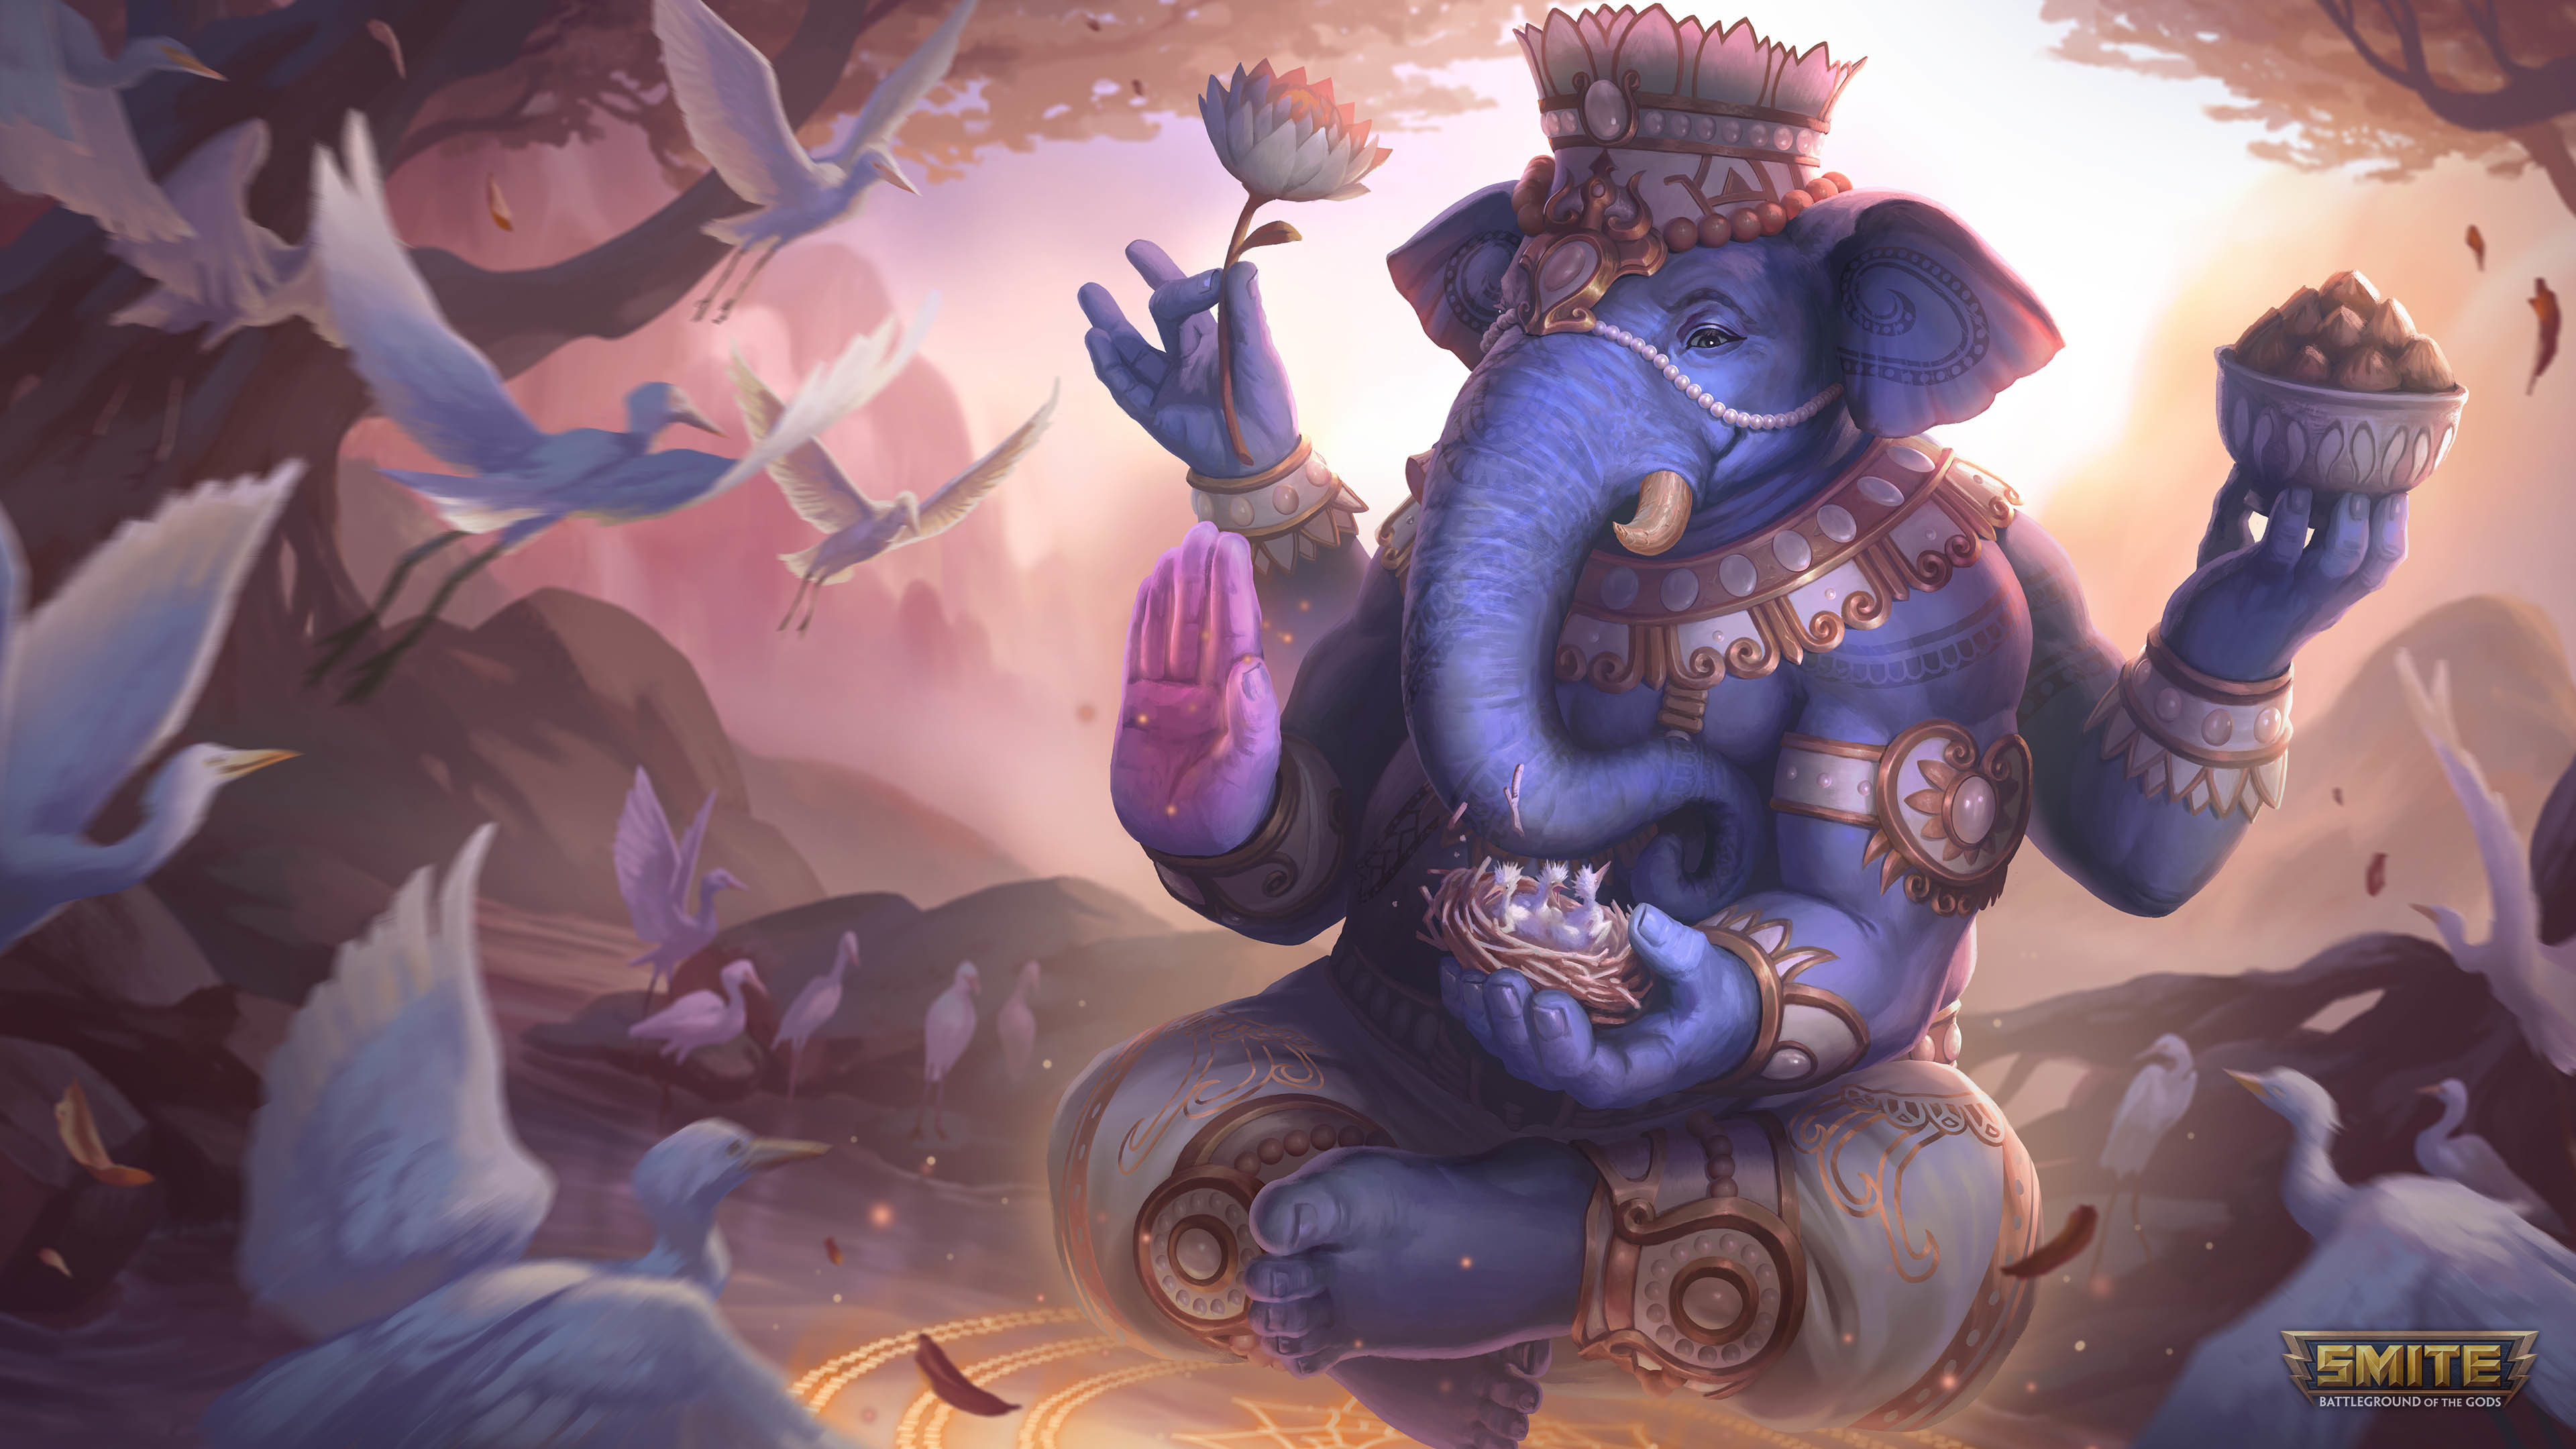 3840x21602021 God Ganesh in Smite 3840x21602021 Resolution Wallpaper, HD  Games 4K Wallpapers, Images, Photos and Background - Wallpapers Den